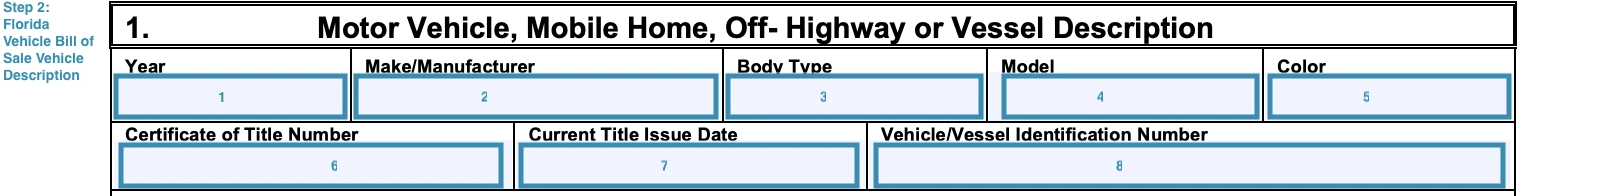 Vehicle particulars section of Florida bill of sale template for motor vehicle